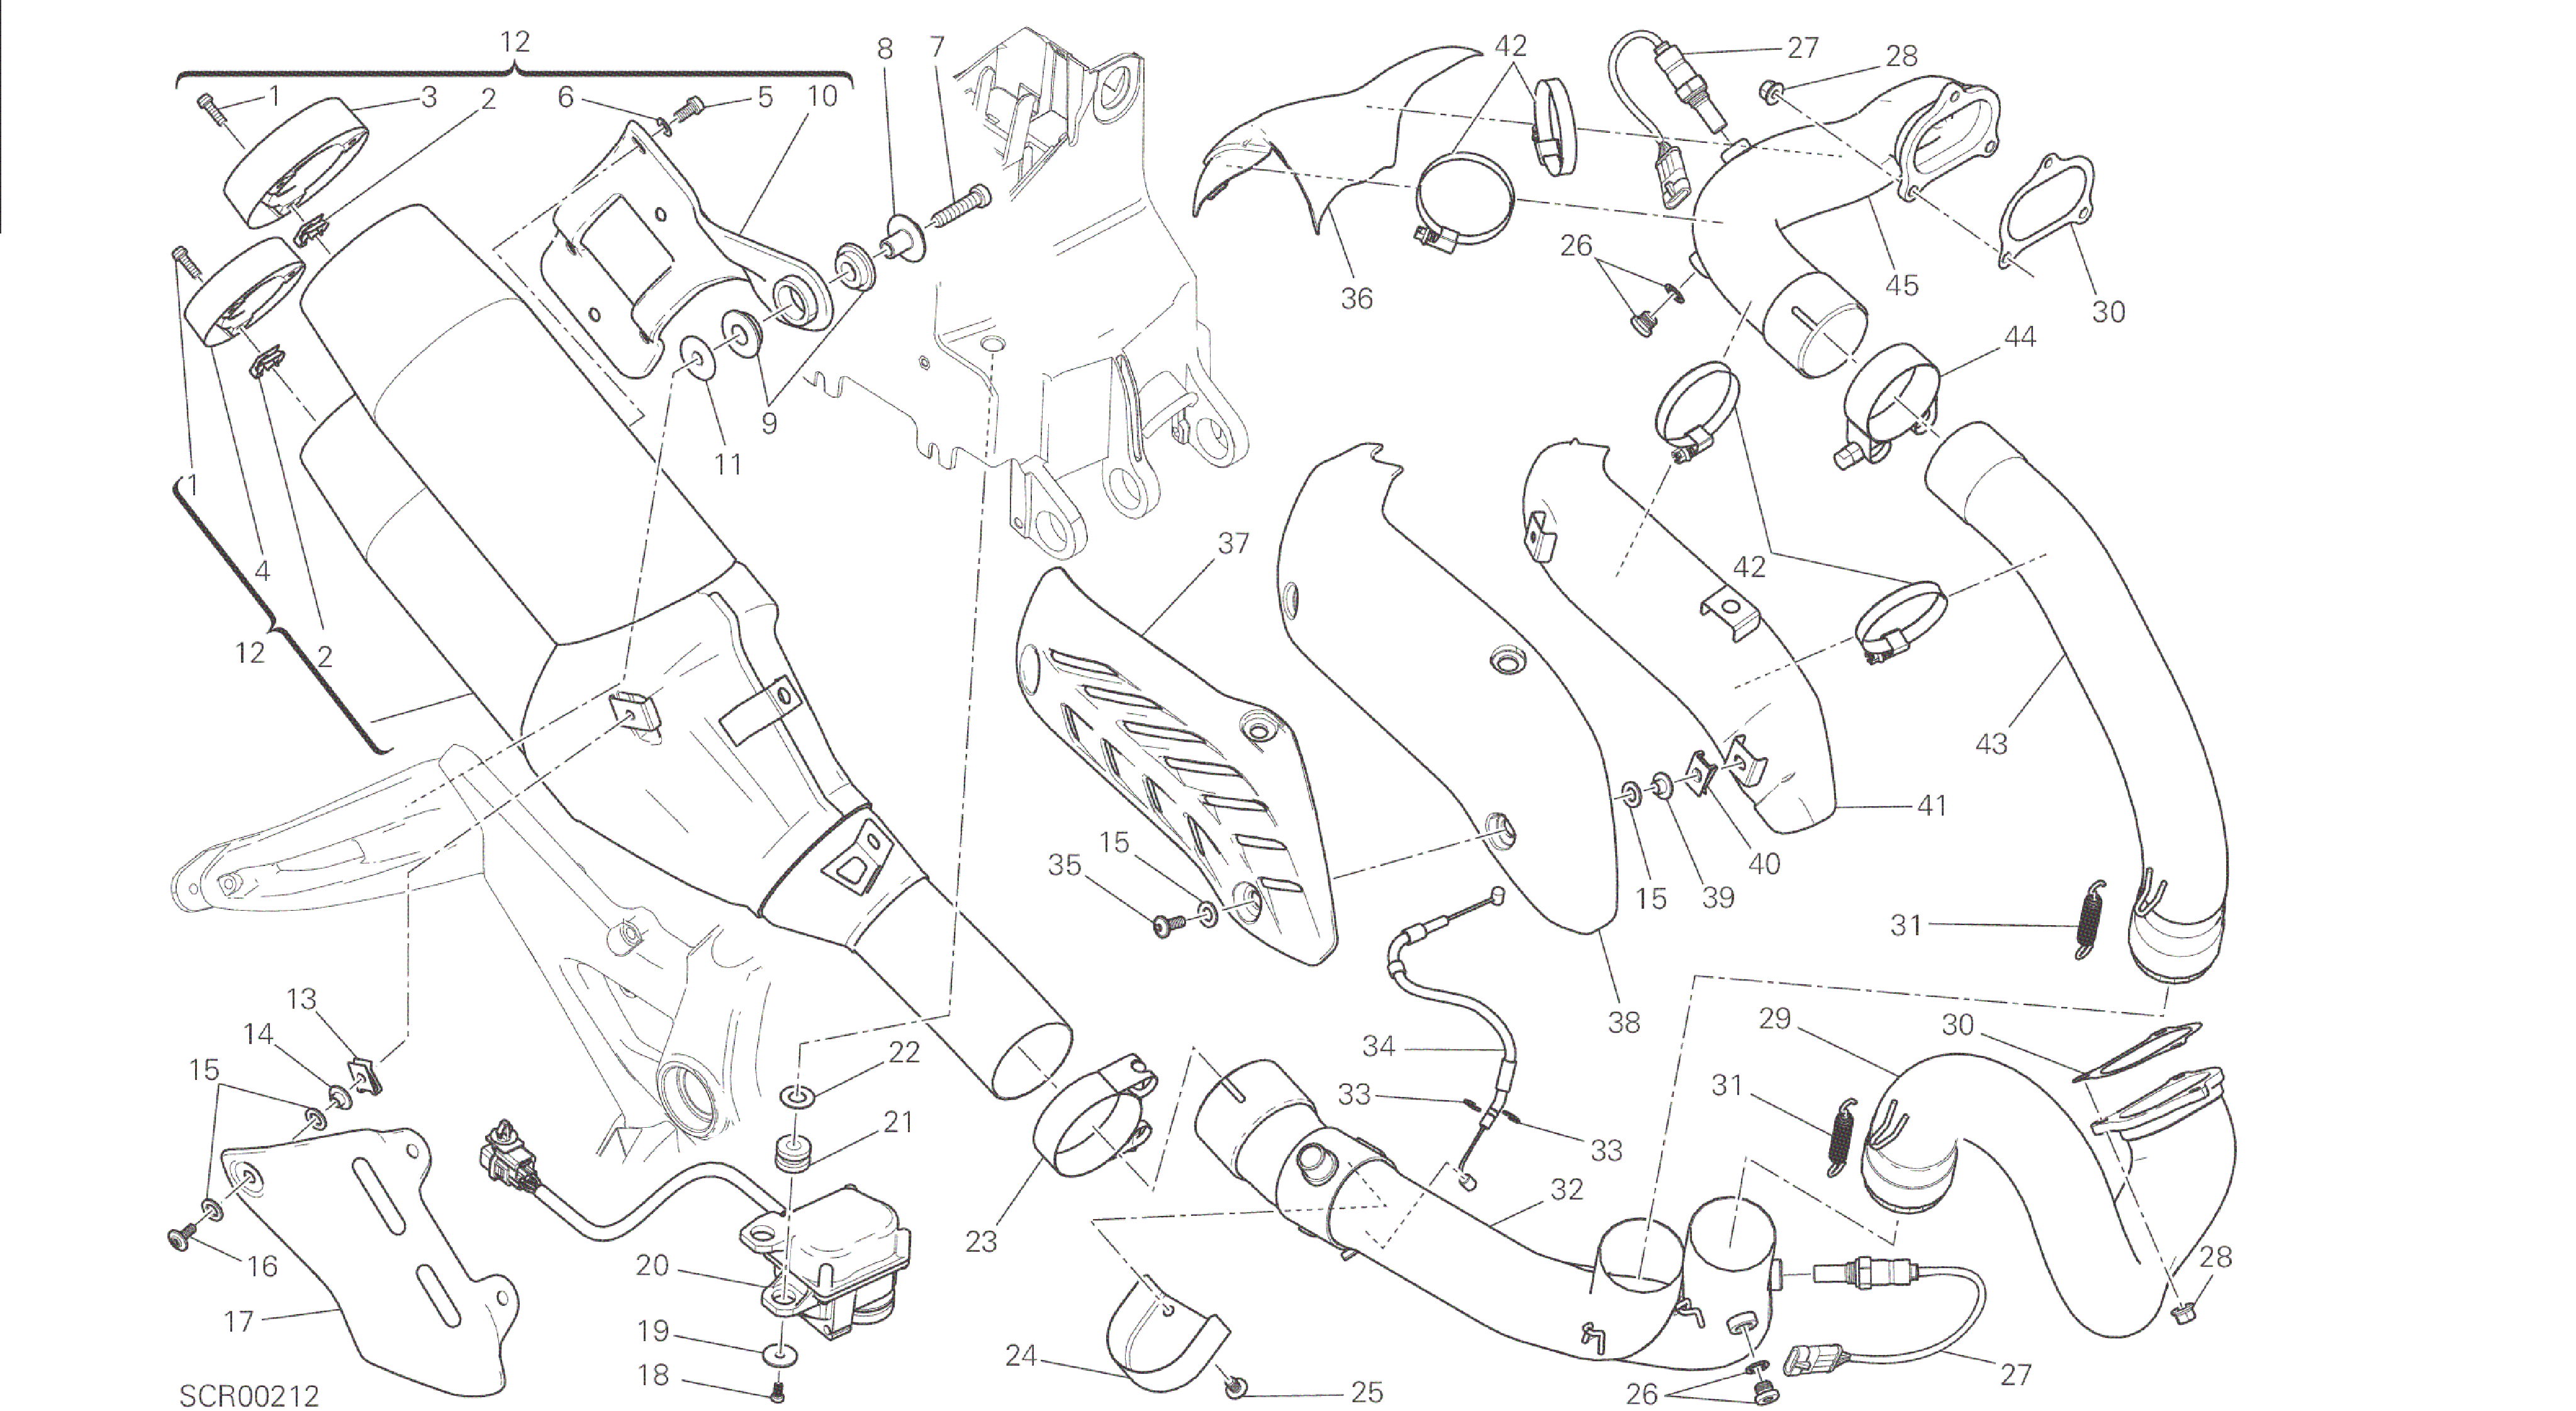 DRAWING 019 - EXHAUST SYSTEM [MOD:M 1200S]GROUP FRAME